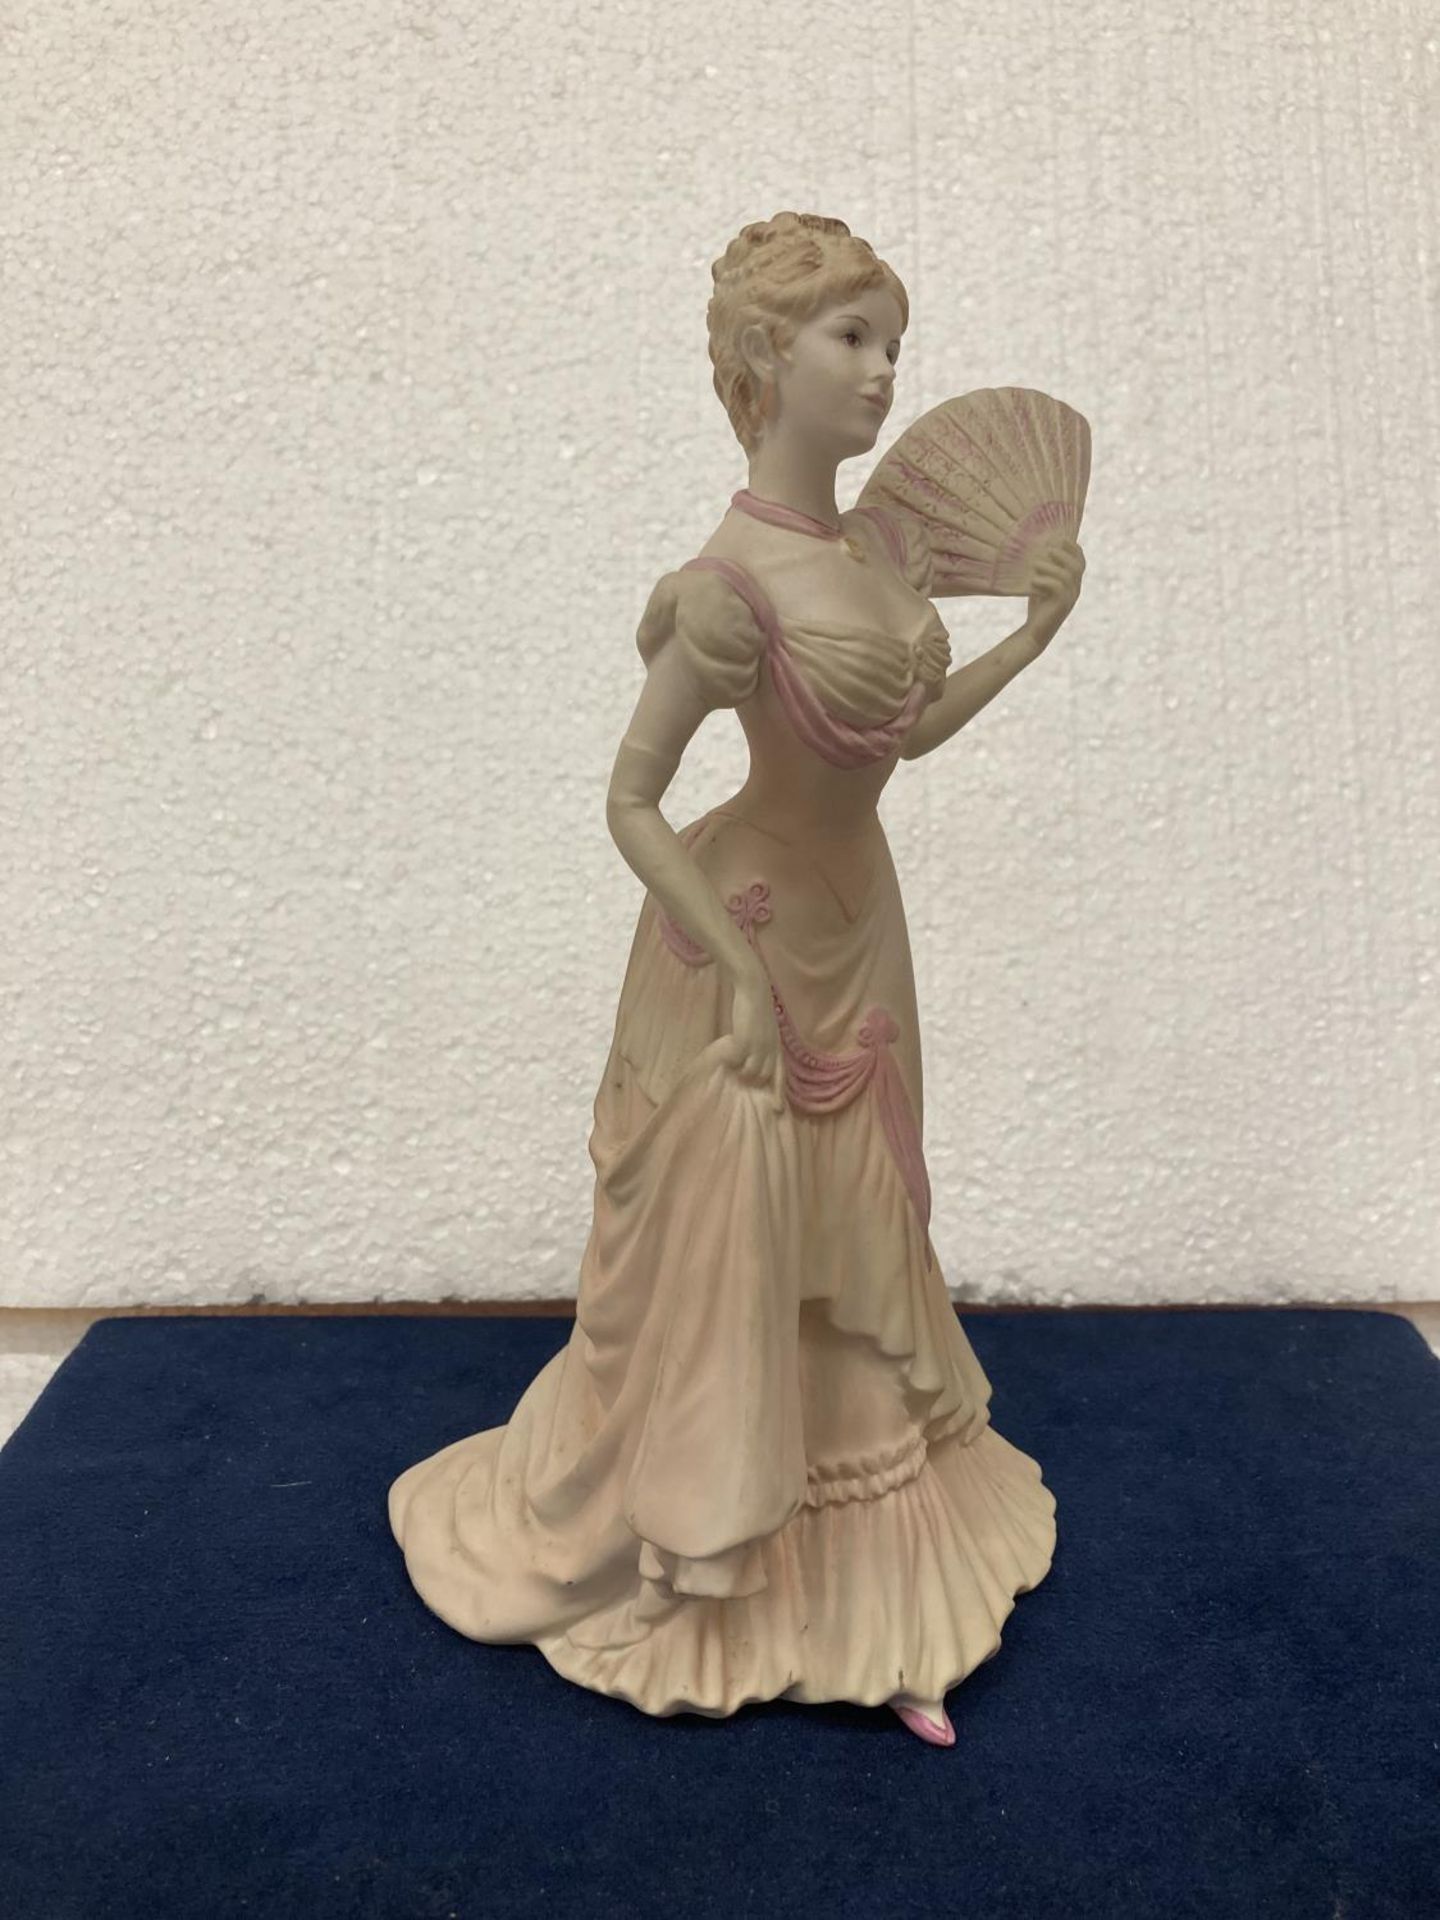 A COALPORT PORCELAIN FIGURINE FROM THE AGE OF ELEGANCE COLLECTION "EVENING AT THE OPERA" HAND - Image 2 of 8